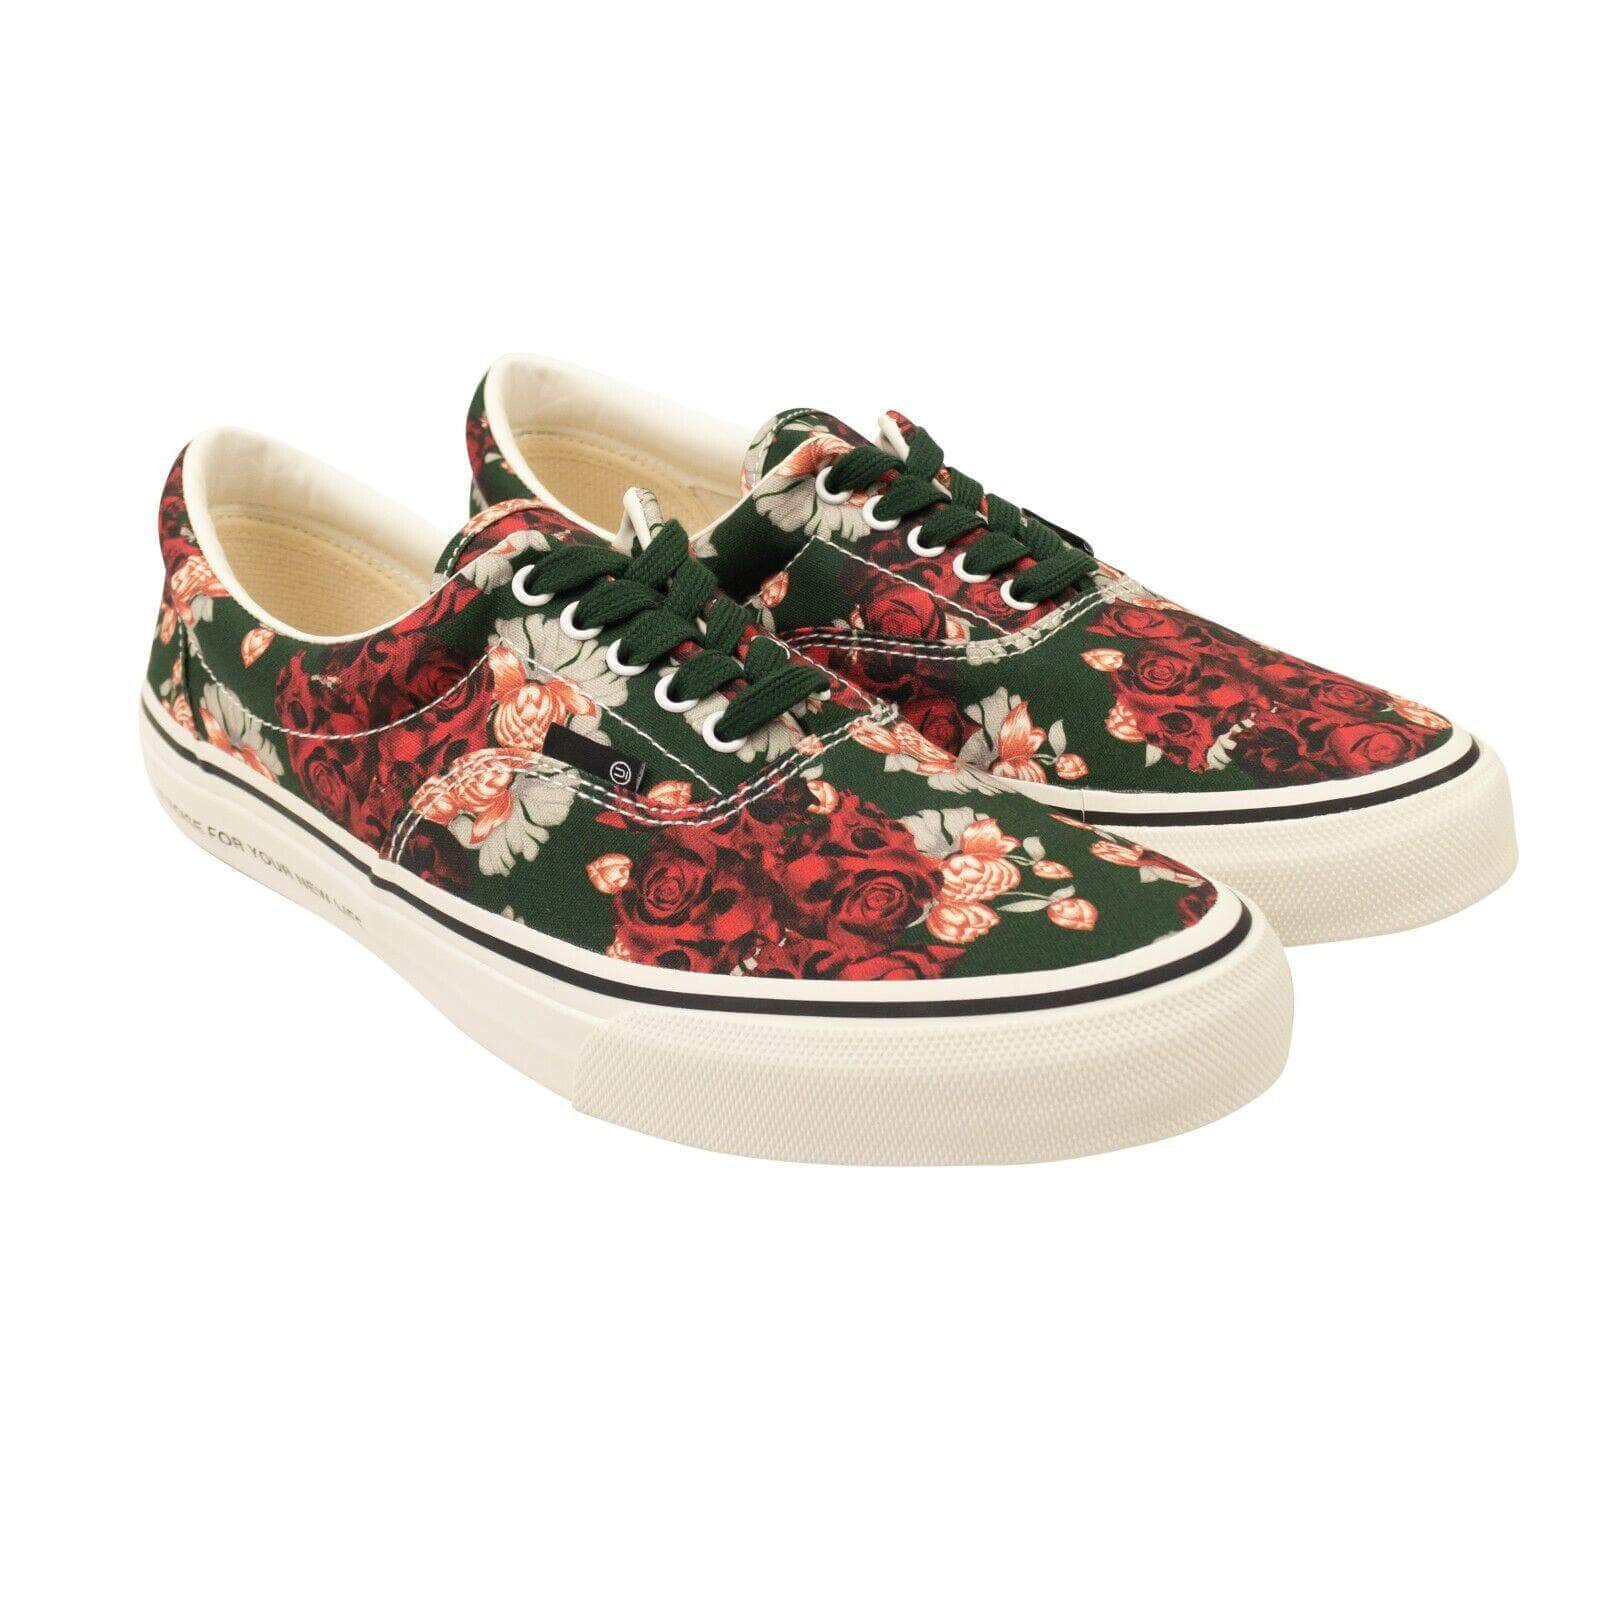 UNDERCOVER 250-500, channelenable-all, chicmi, couponcollection, gender-mens, main-shoes, mens-shoes, size-l, size-m, size-xl, undercover Green Floral Print Canvas Sneakers